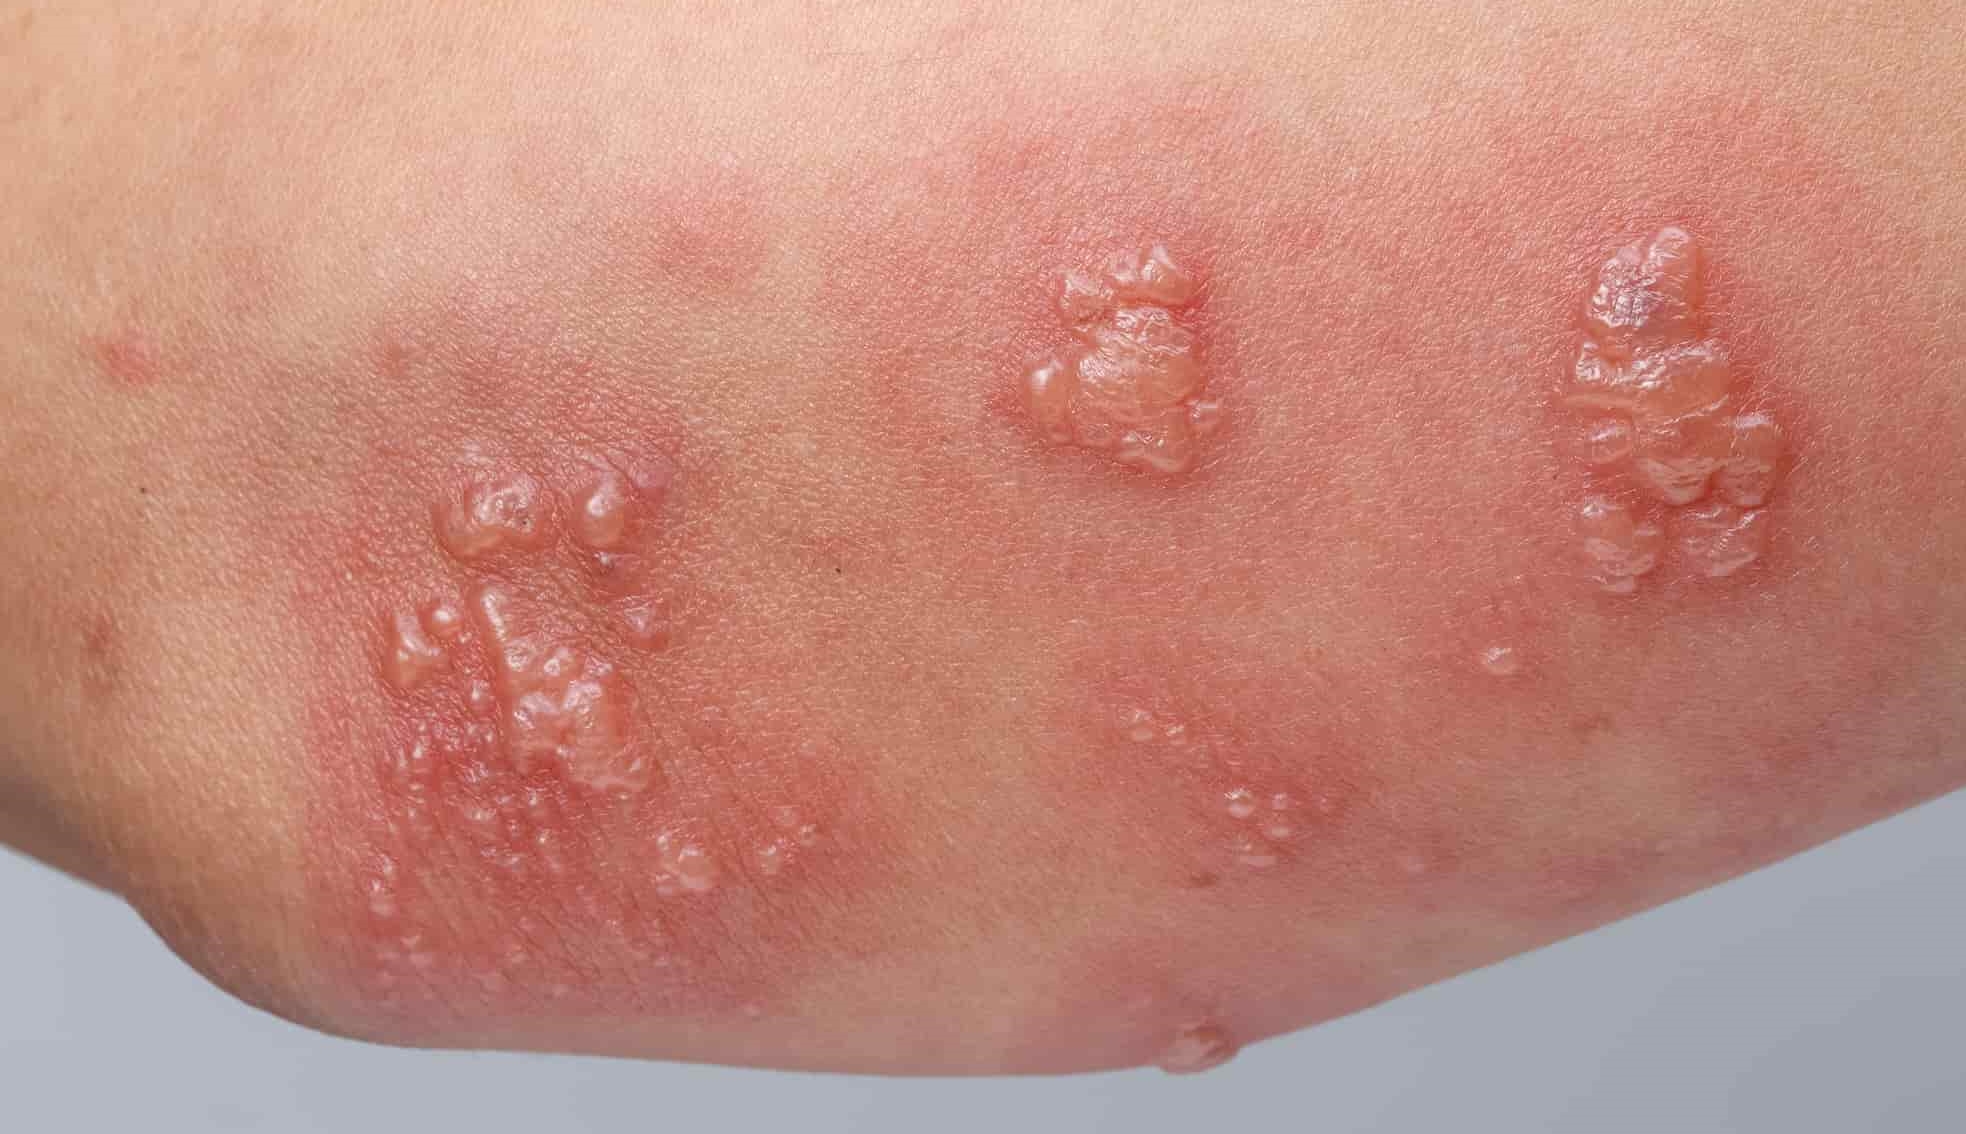 What Does A Herpes Rash Look Like? (With Pictures)